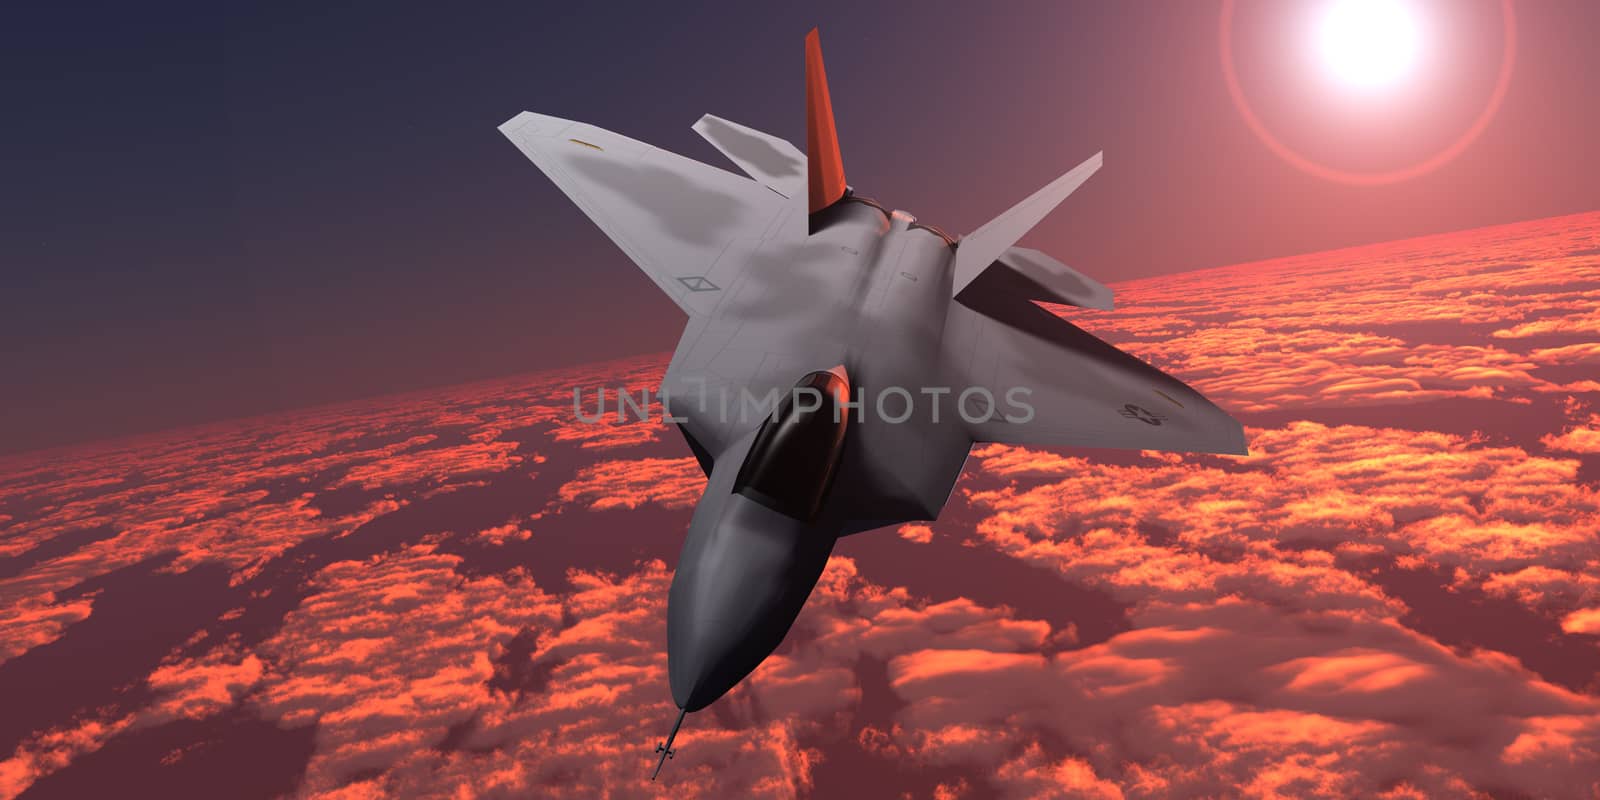 Sunset Fire F22 Fighter Jet by Catmando